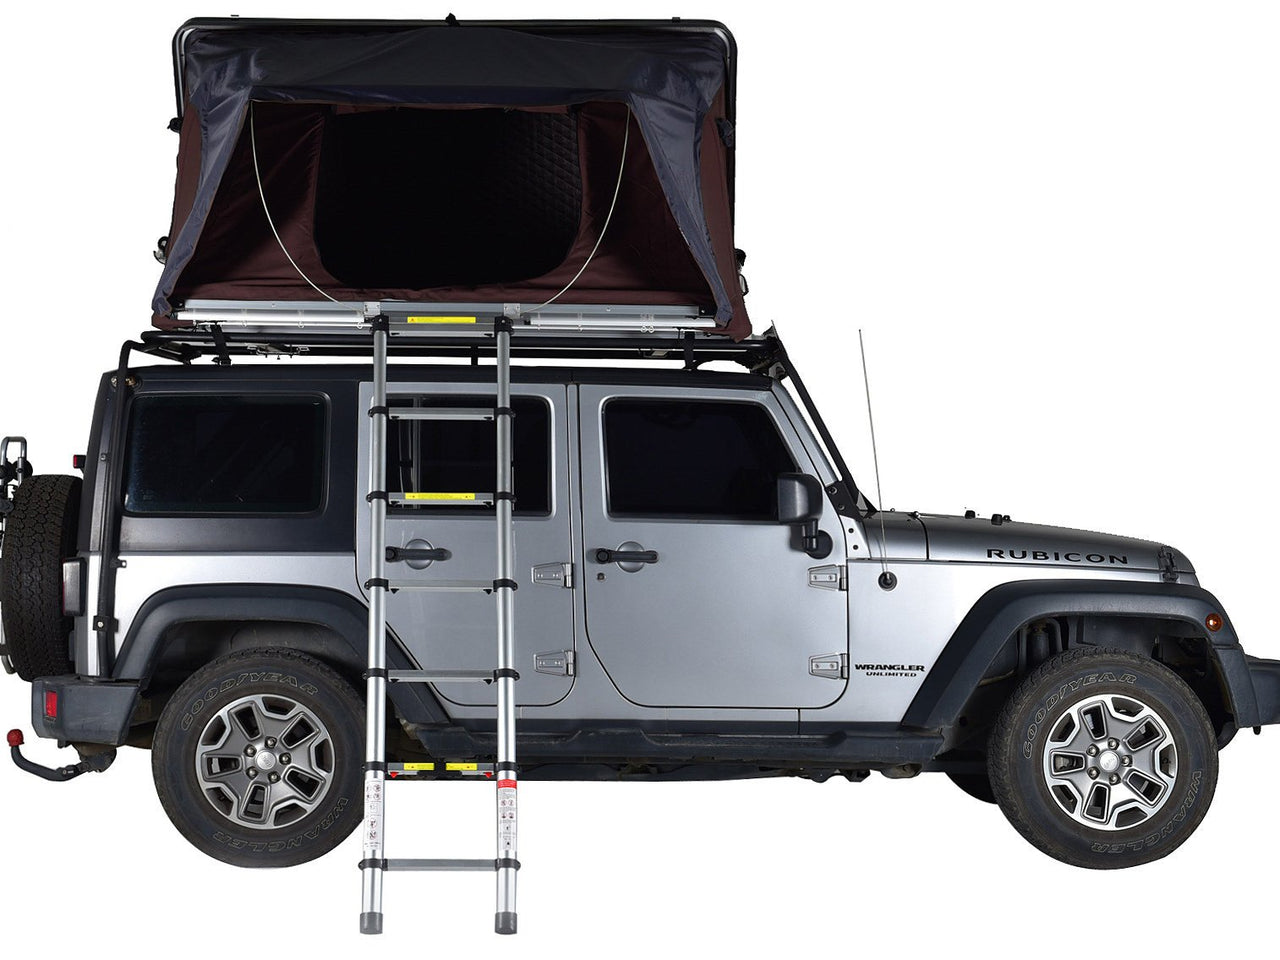 iKamper roof top tent shown open on top of Jeep Rubicon with tent ladder providing entrance to roof top tent over the drivers side rear door of vehicle.